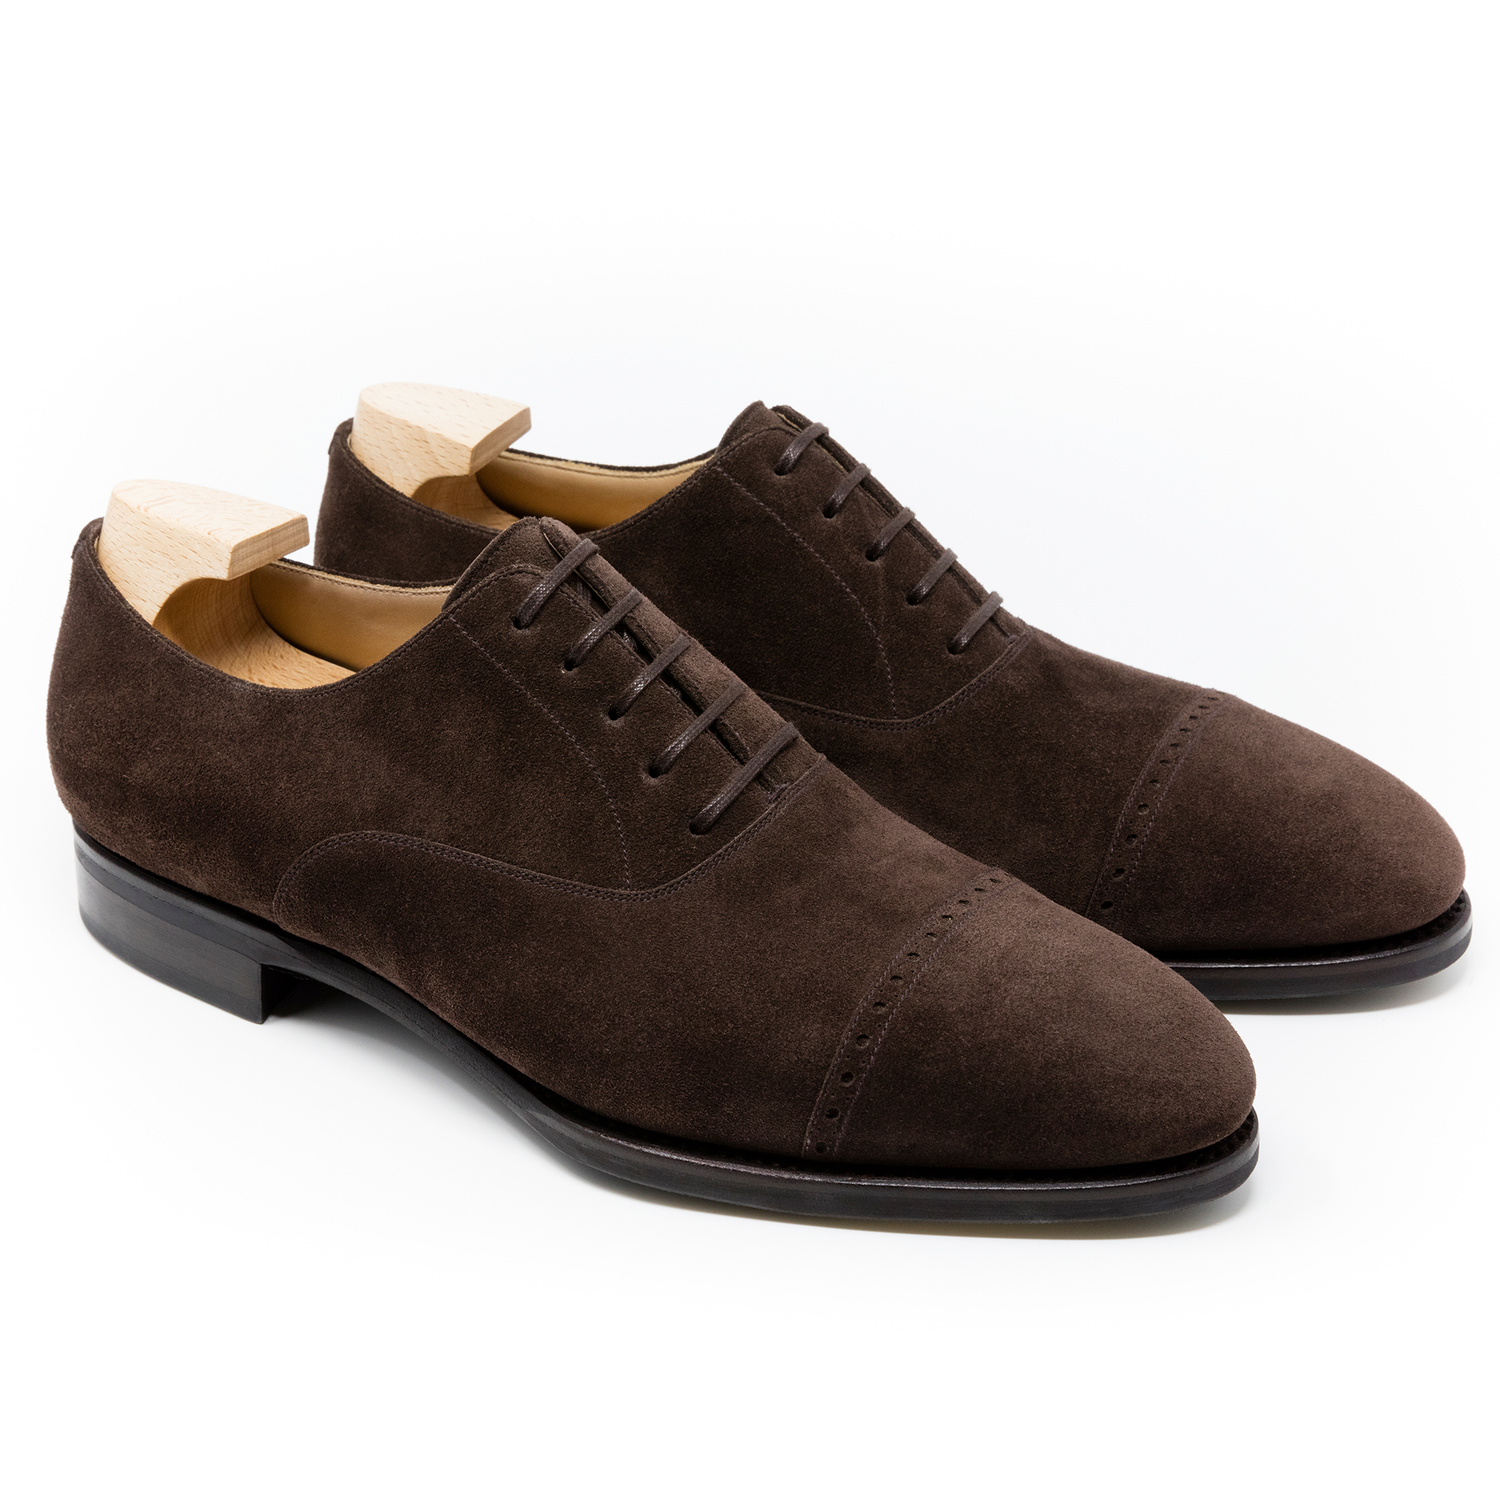 TLB Mallorca leather shoes 113 / GOYA / SUEDE BROWN